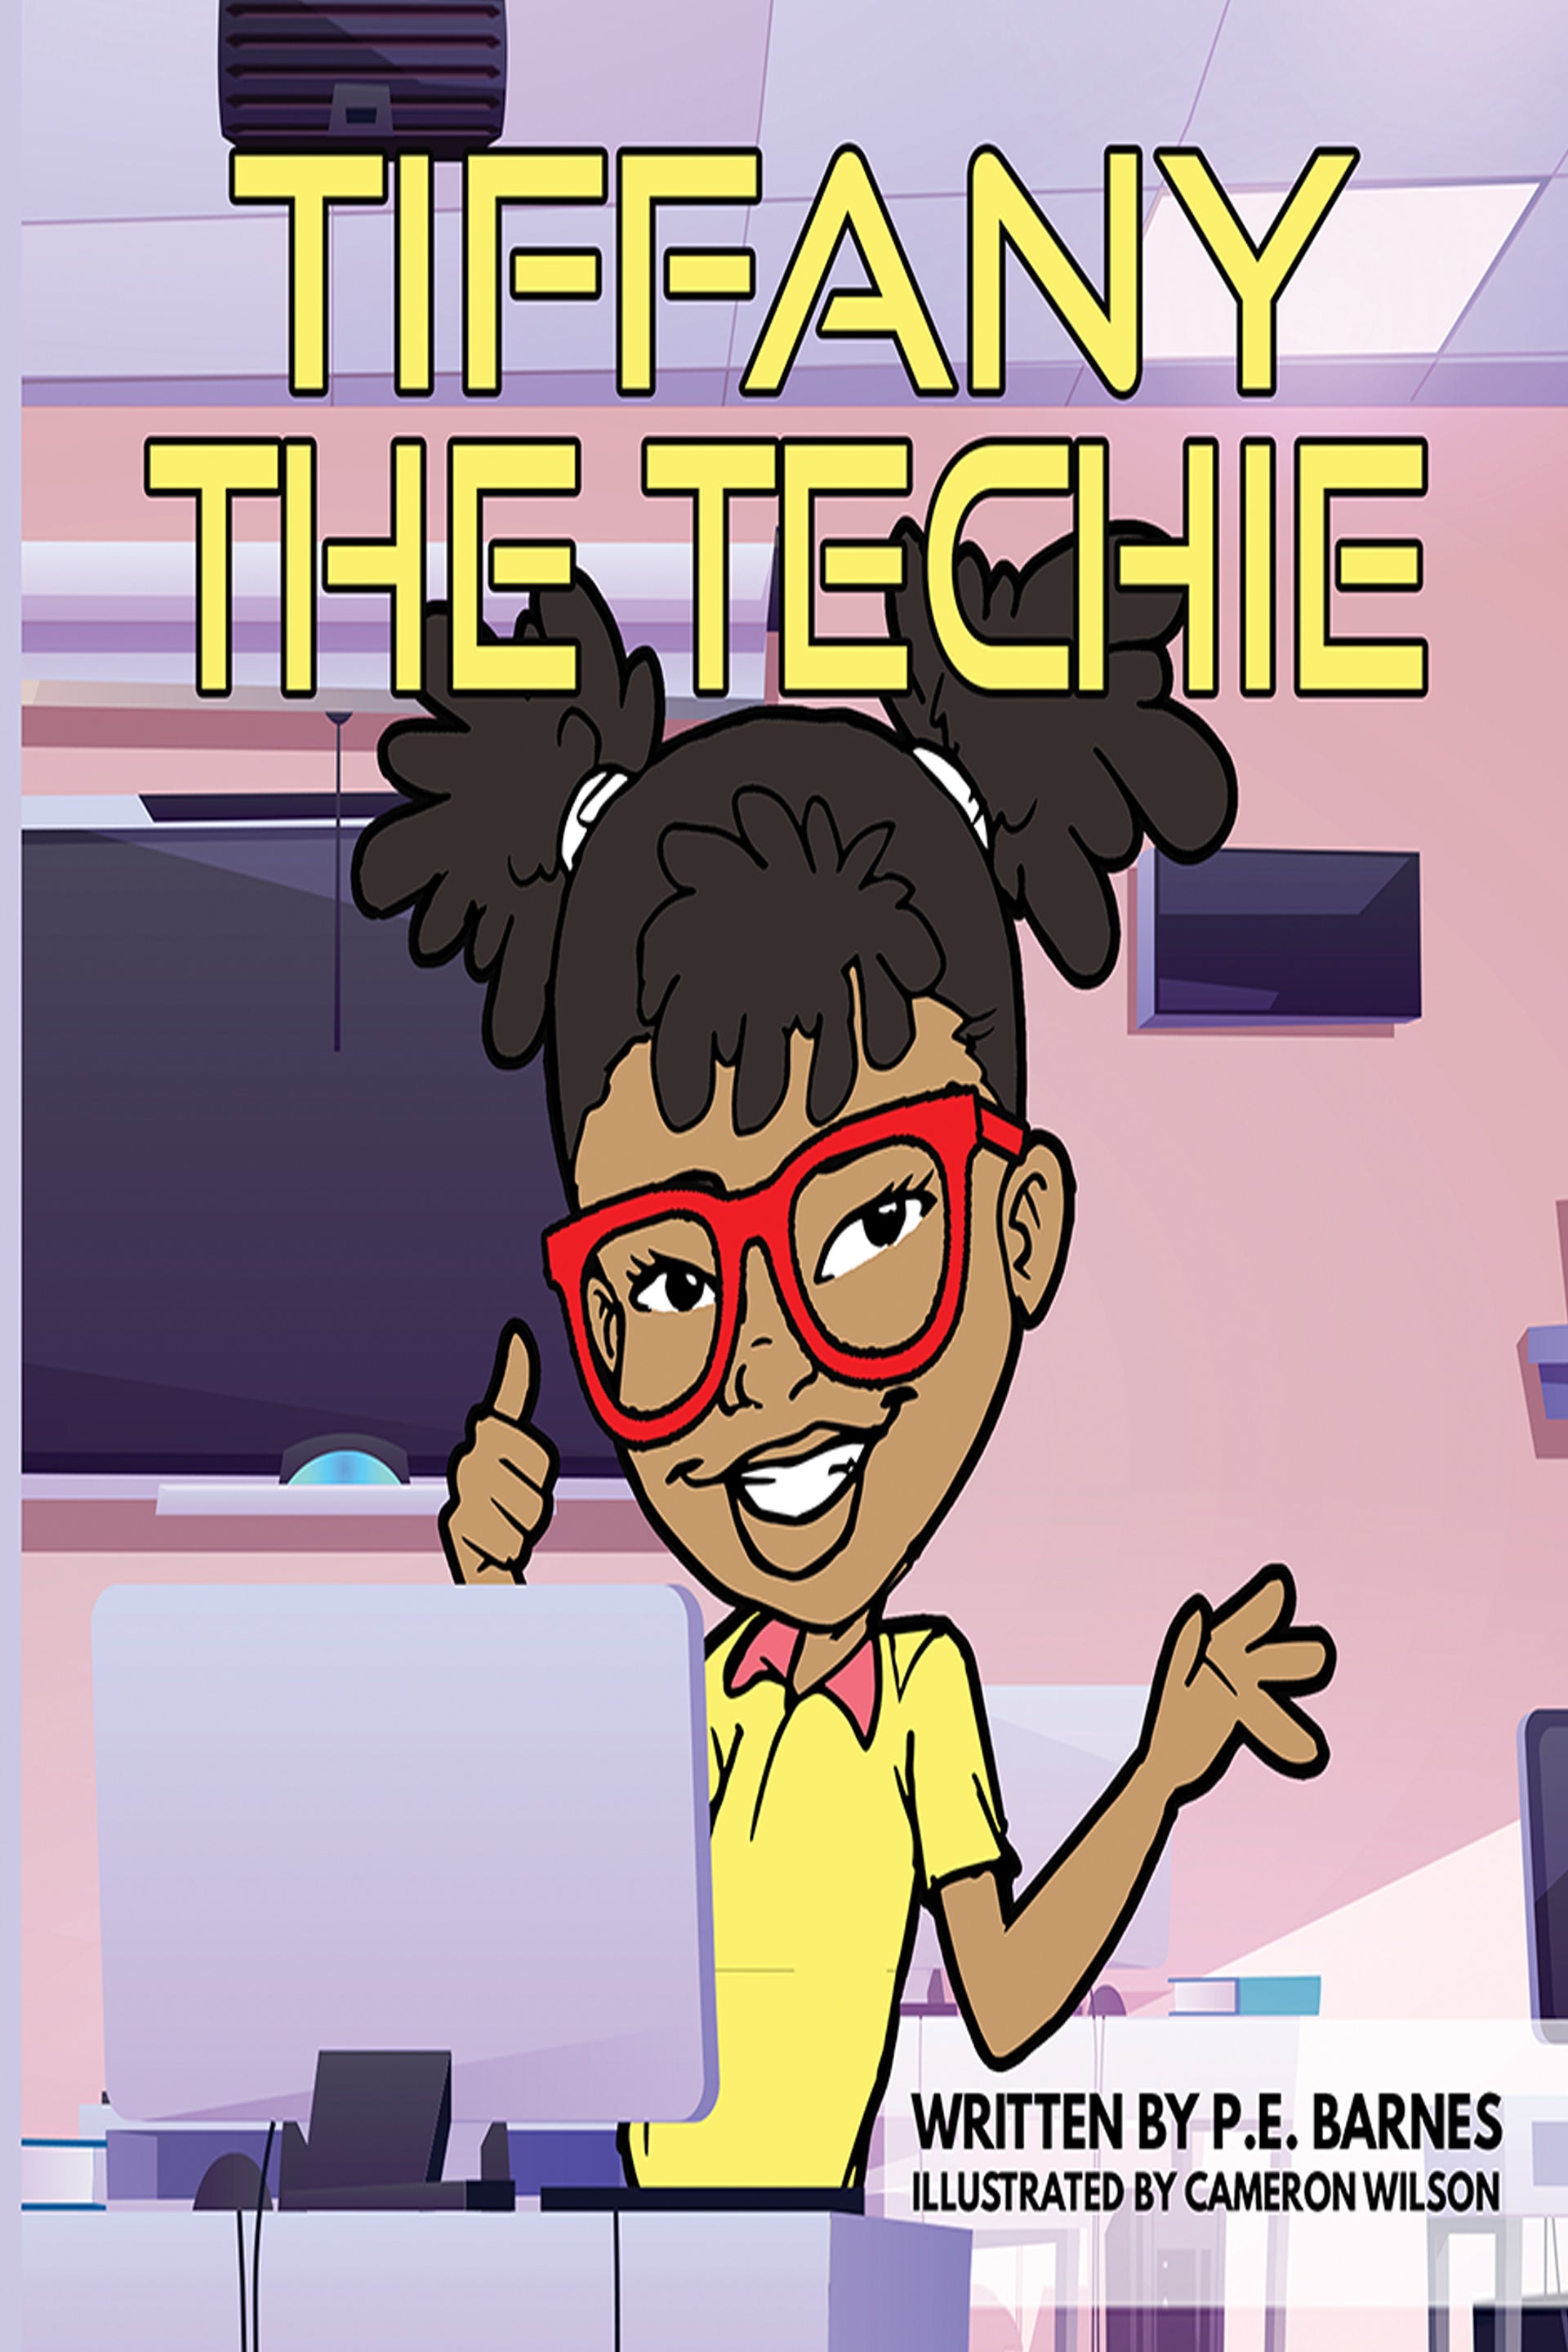 Tiffany the Techie ( Ages 9-12) ⭐️⭐️⭐️⭐️